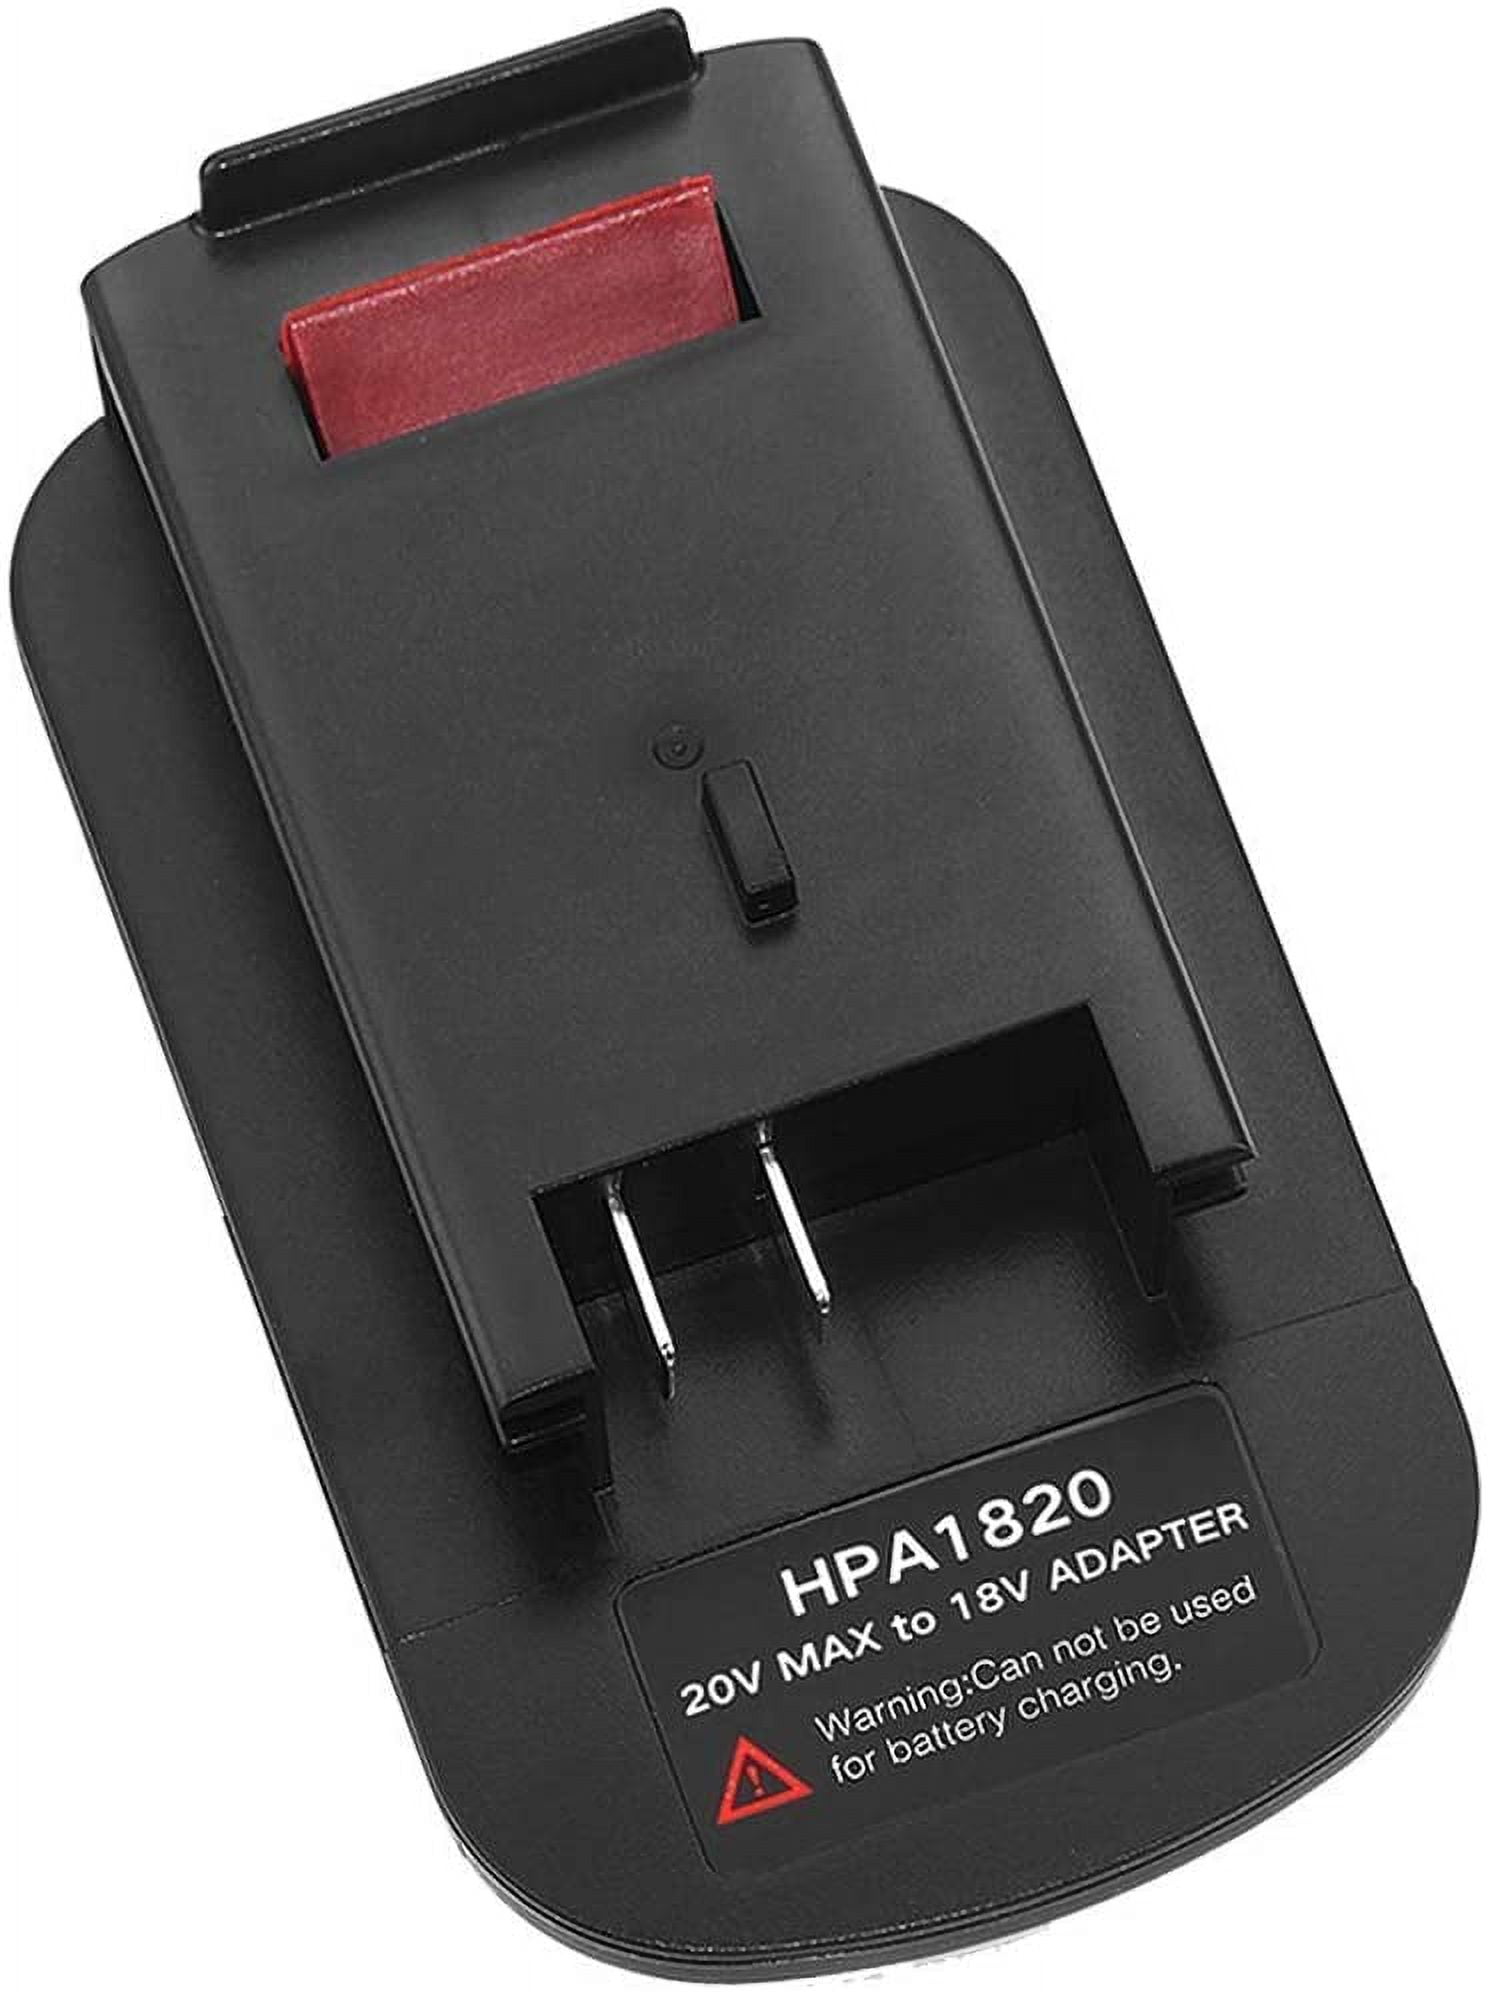 Black and Decker Battery Adapter to Bosch – Power Tools Adapters